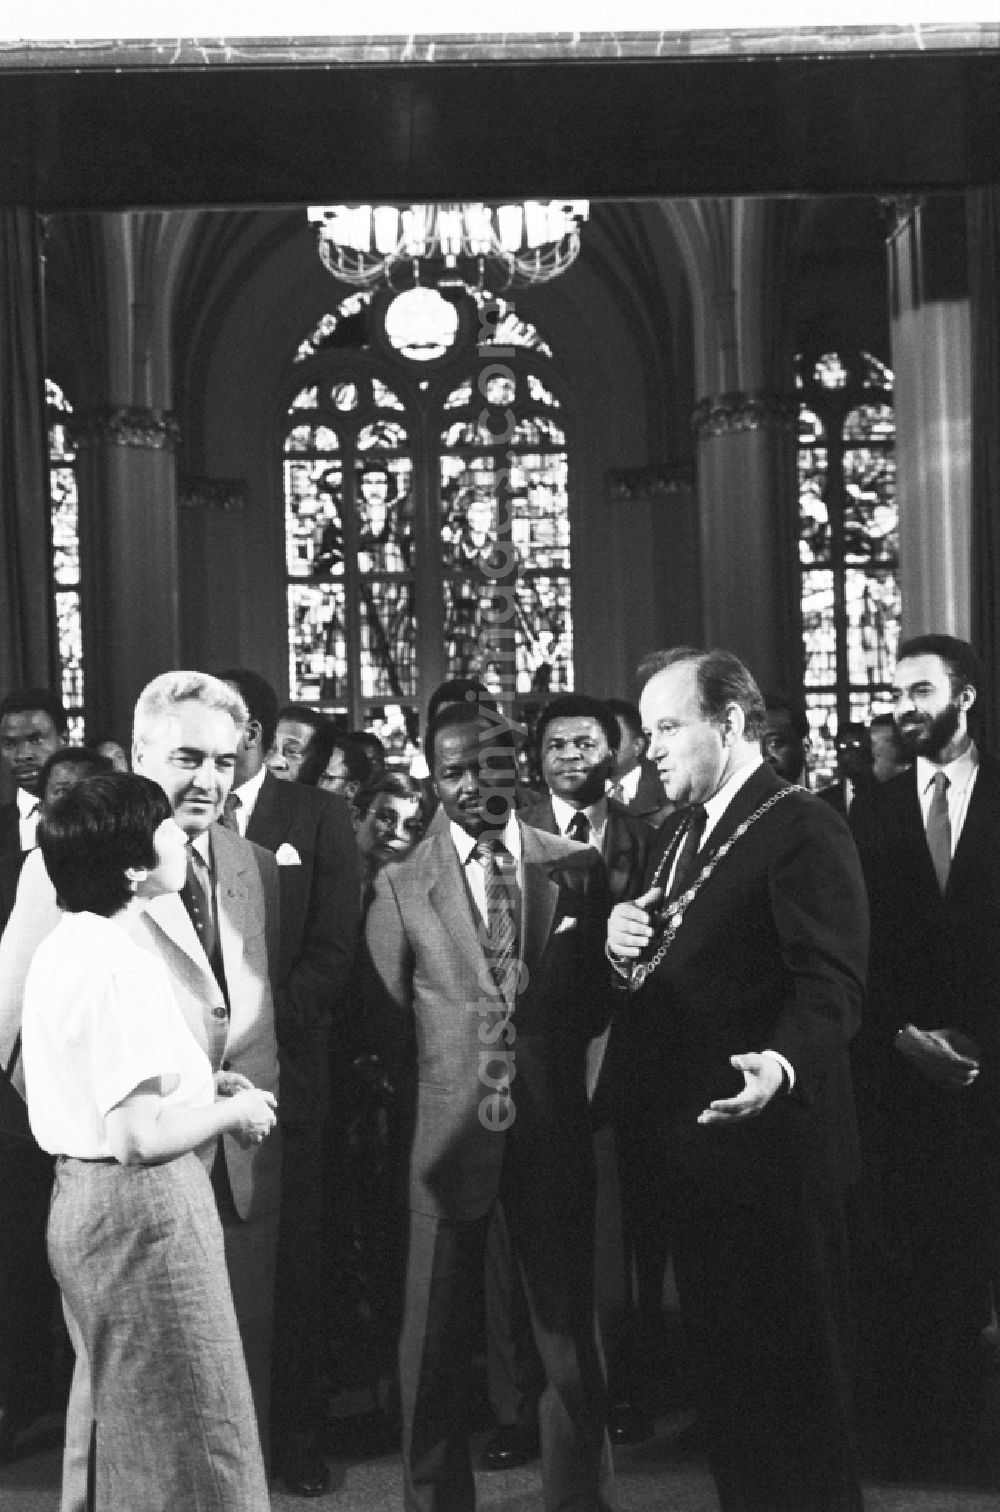 GDR picture archive: Berlin - The mayor of East Berlin Erhard Krack leads the President of the People's Republic of Mozambique, Joaquim Chissano and his delegation by the Red Town Hall in Berlin in the state of Berlin in the area of the former GDR, German Democratic Republic